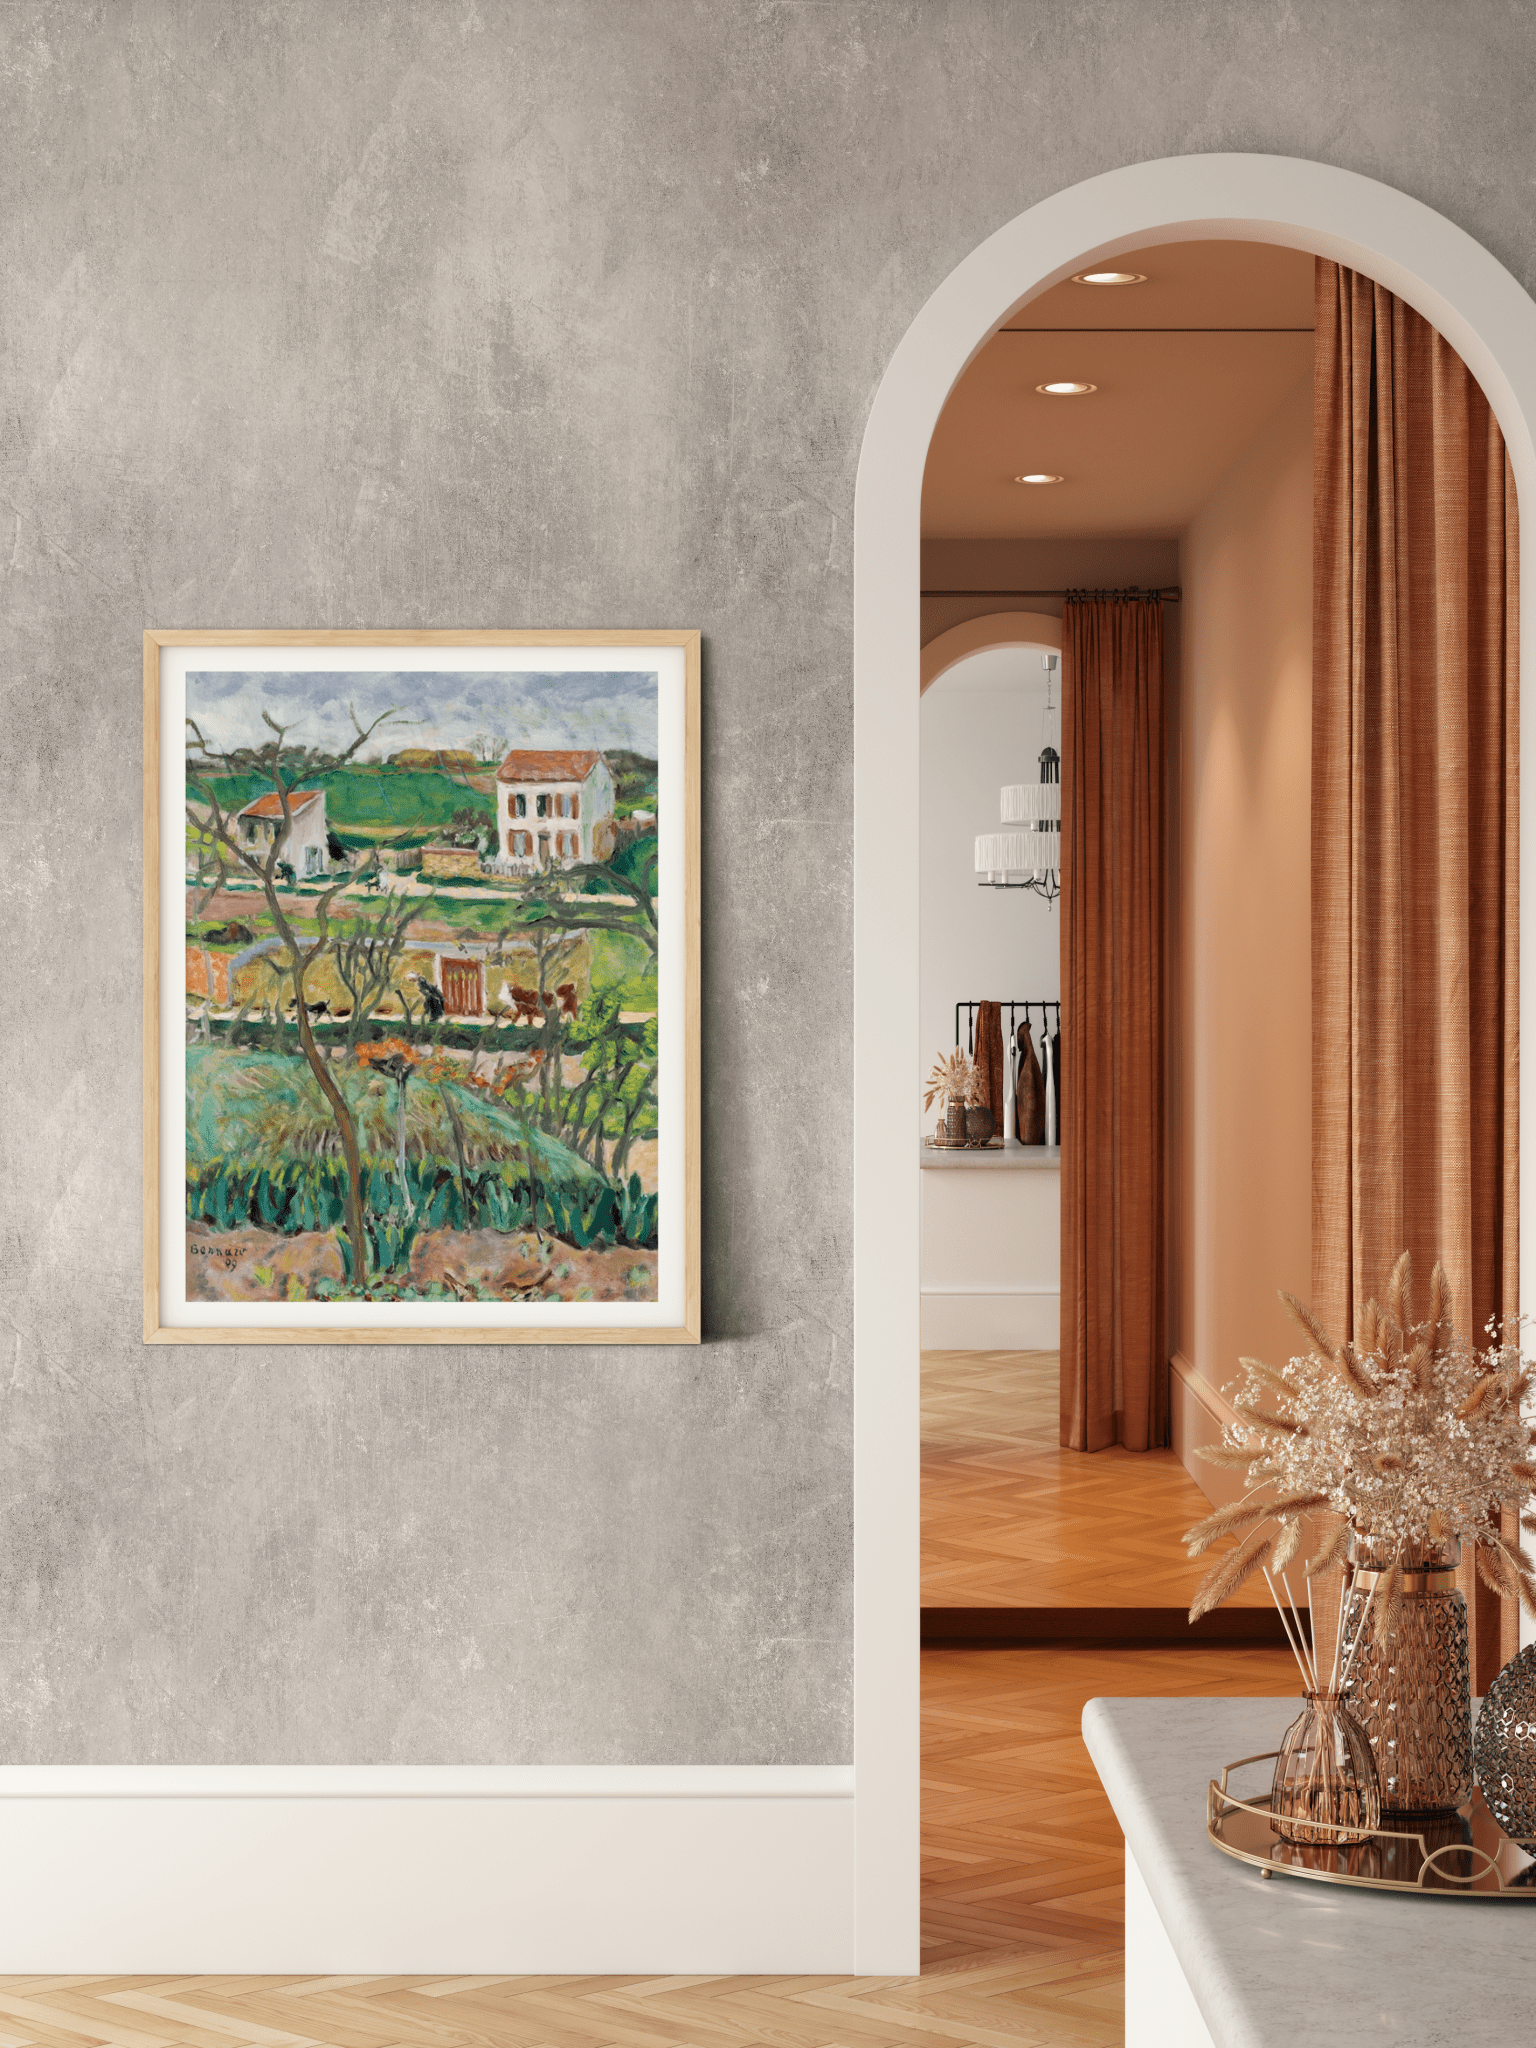 Elegant interior with Venetian plaster walls showcasing a framed landscape painting, modern furniture, and warm drapery in a stylish home decor setting